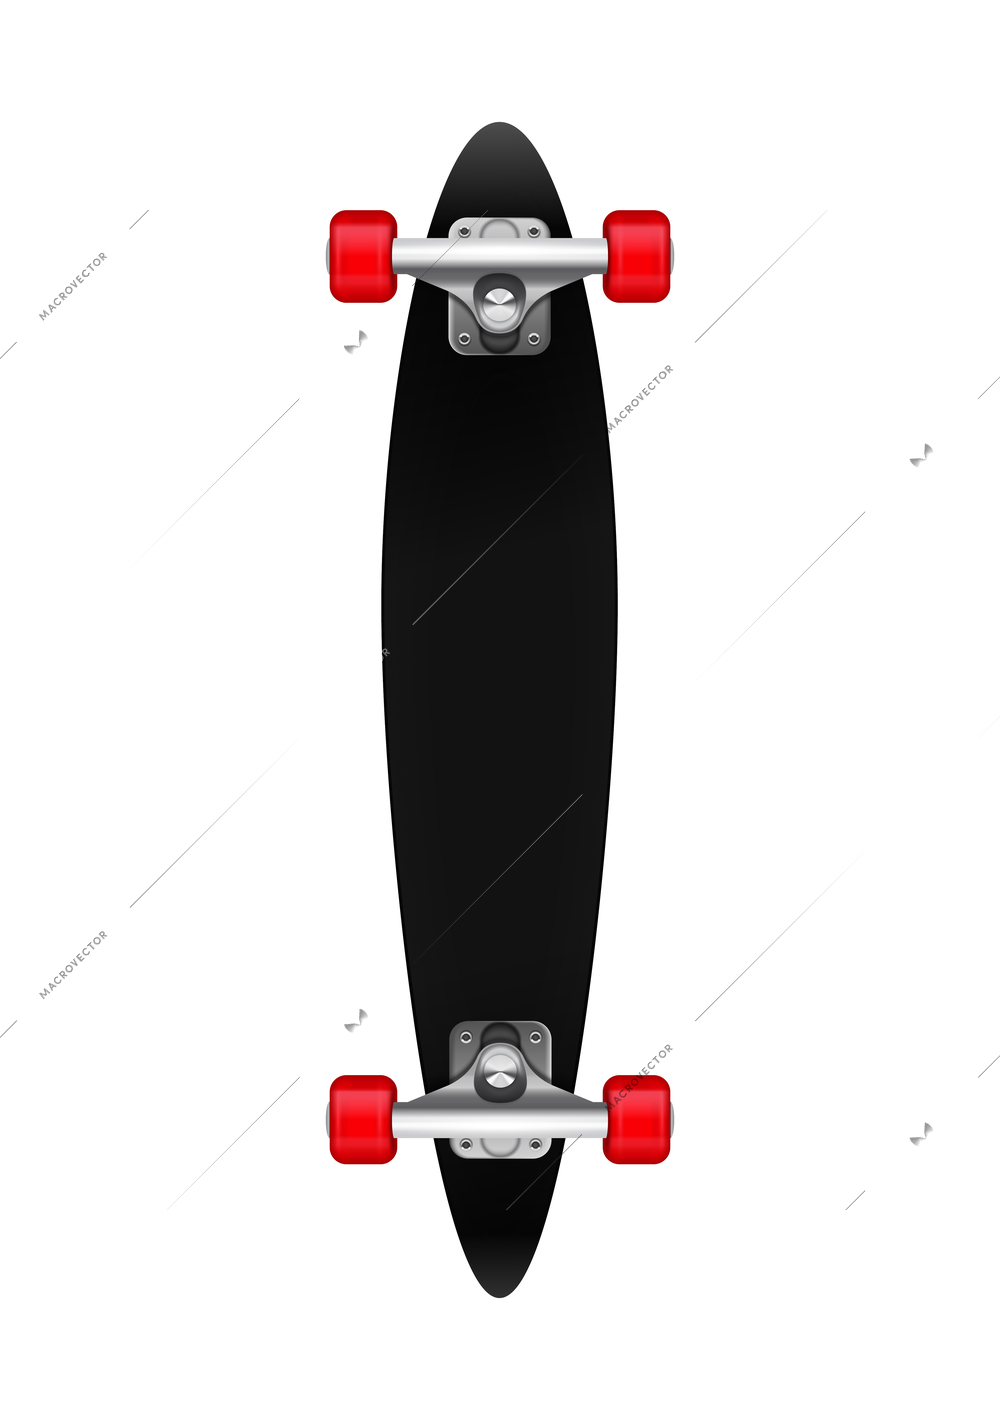 Skateboards realistic composition with isolated image of skateboard with red wheels on blank background vector illustration